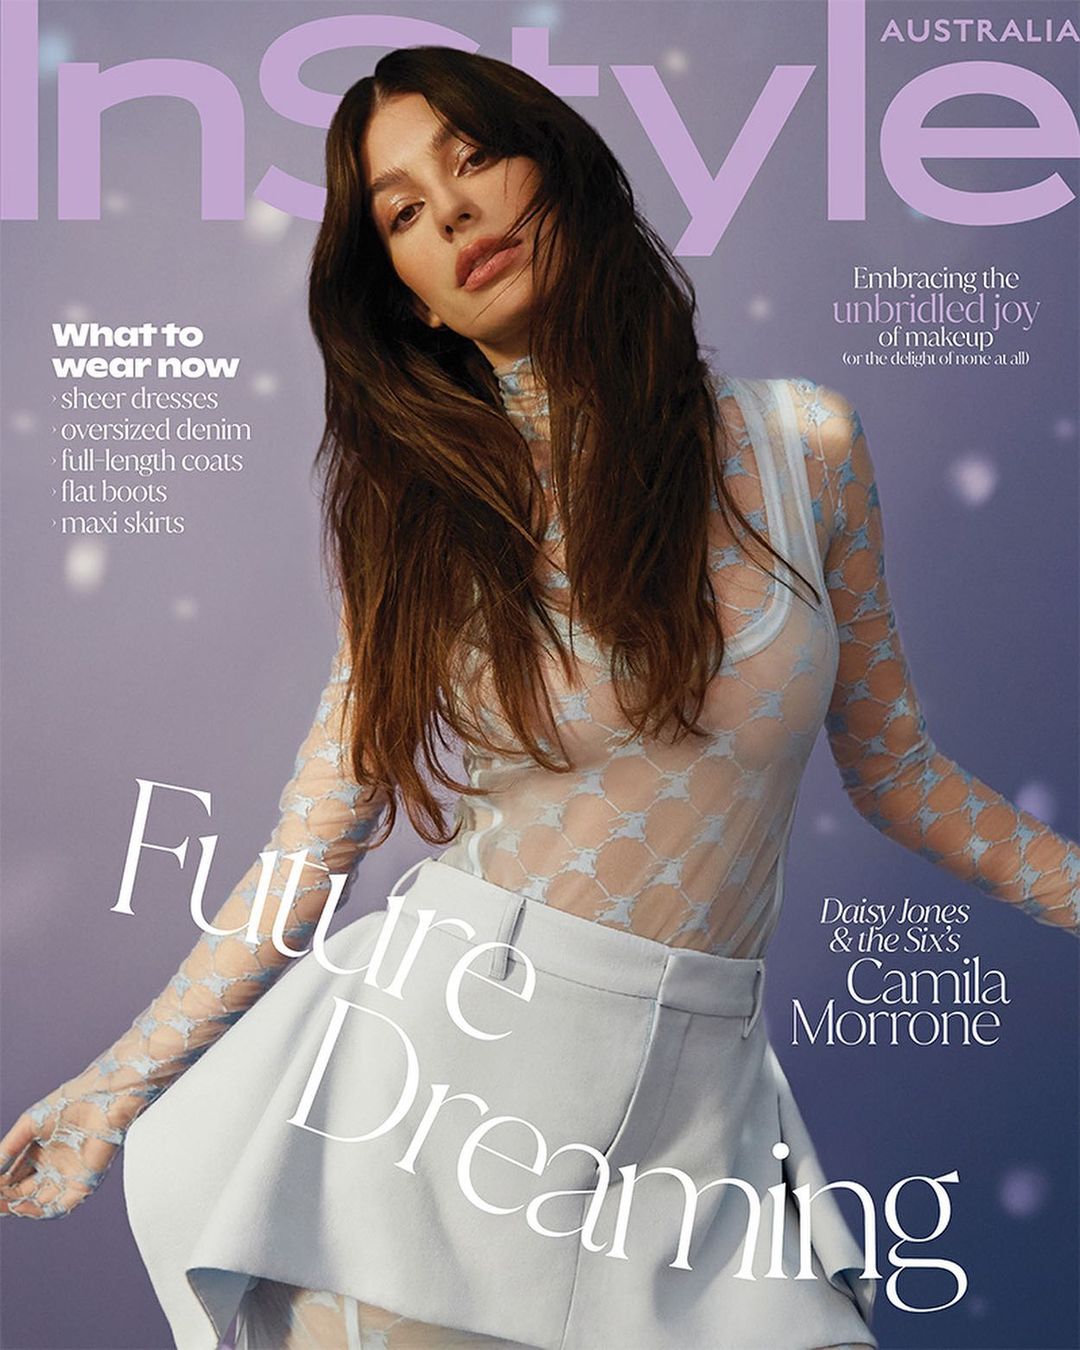 Stunning Camila Morrone graces the cover of InStyle Australia in a glamorous photoshoot